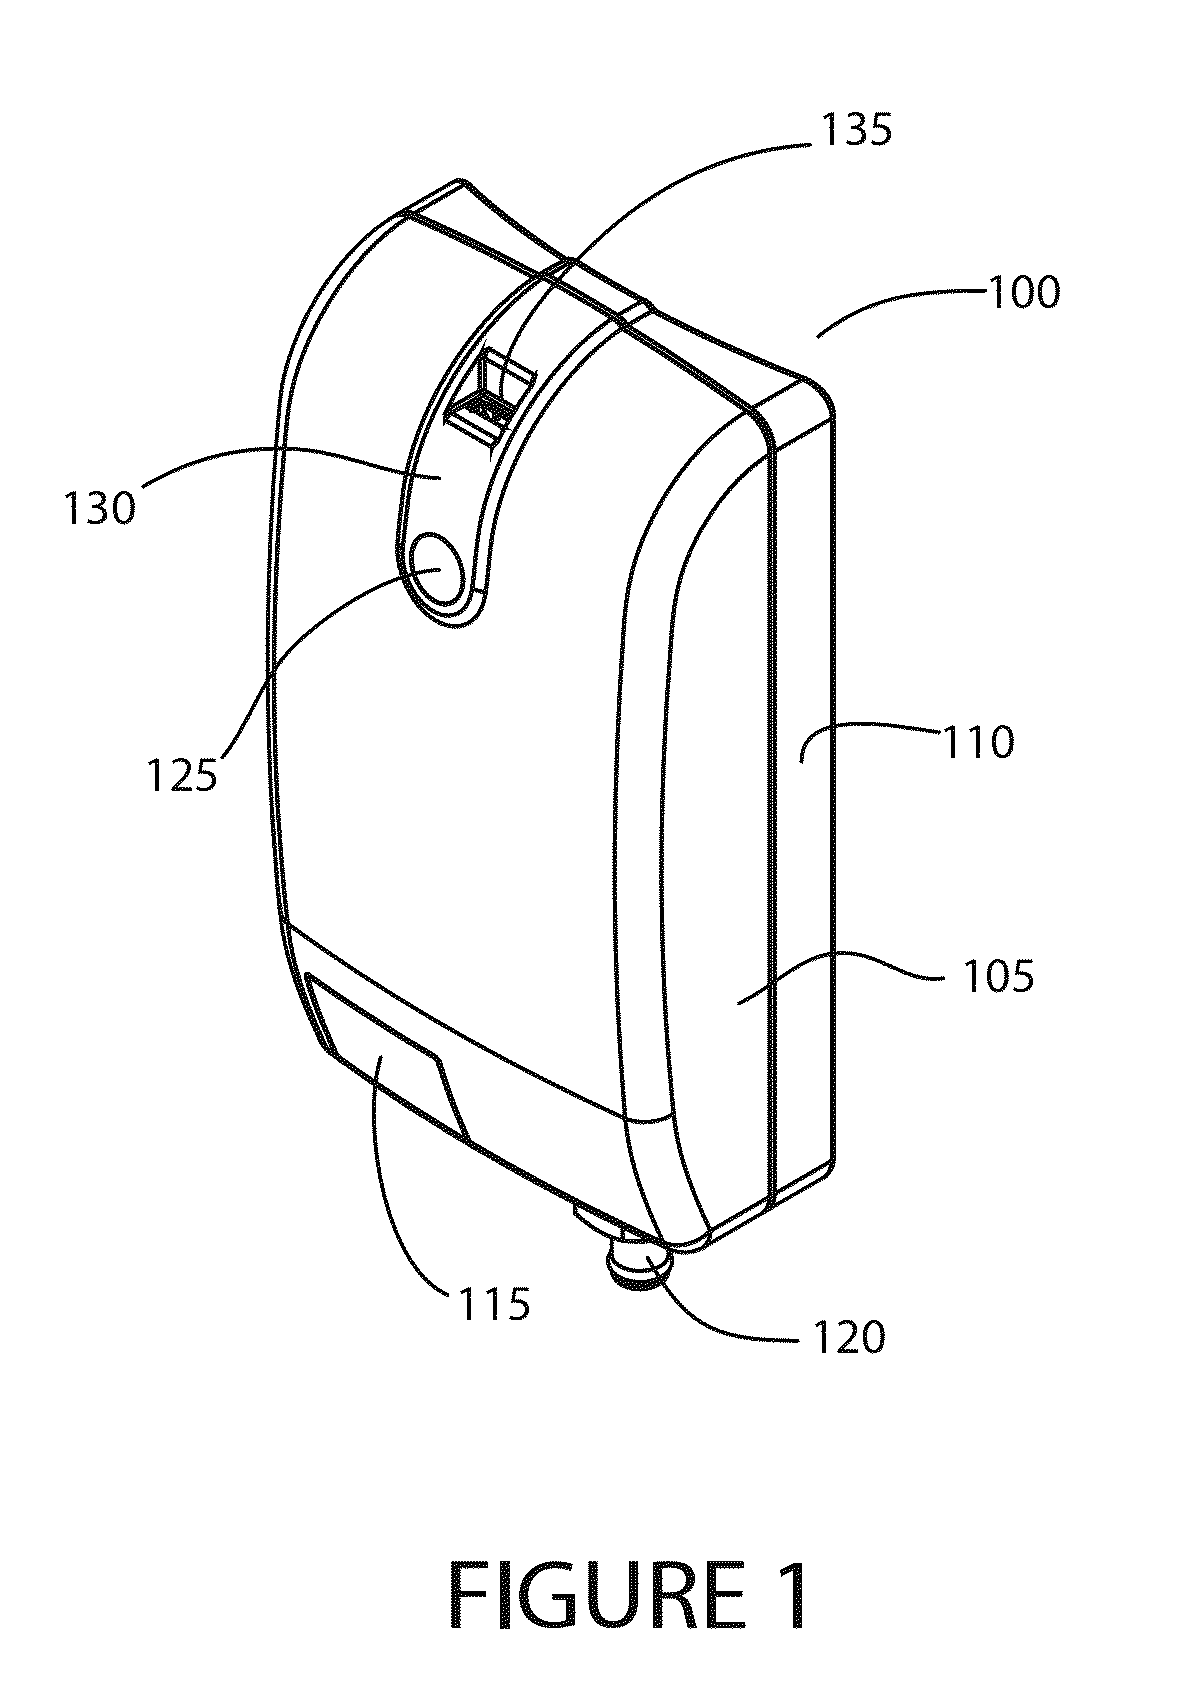 Portable intermittent pneumatic compression system